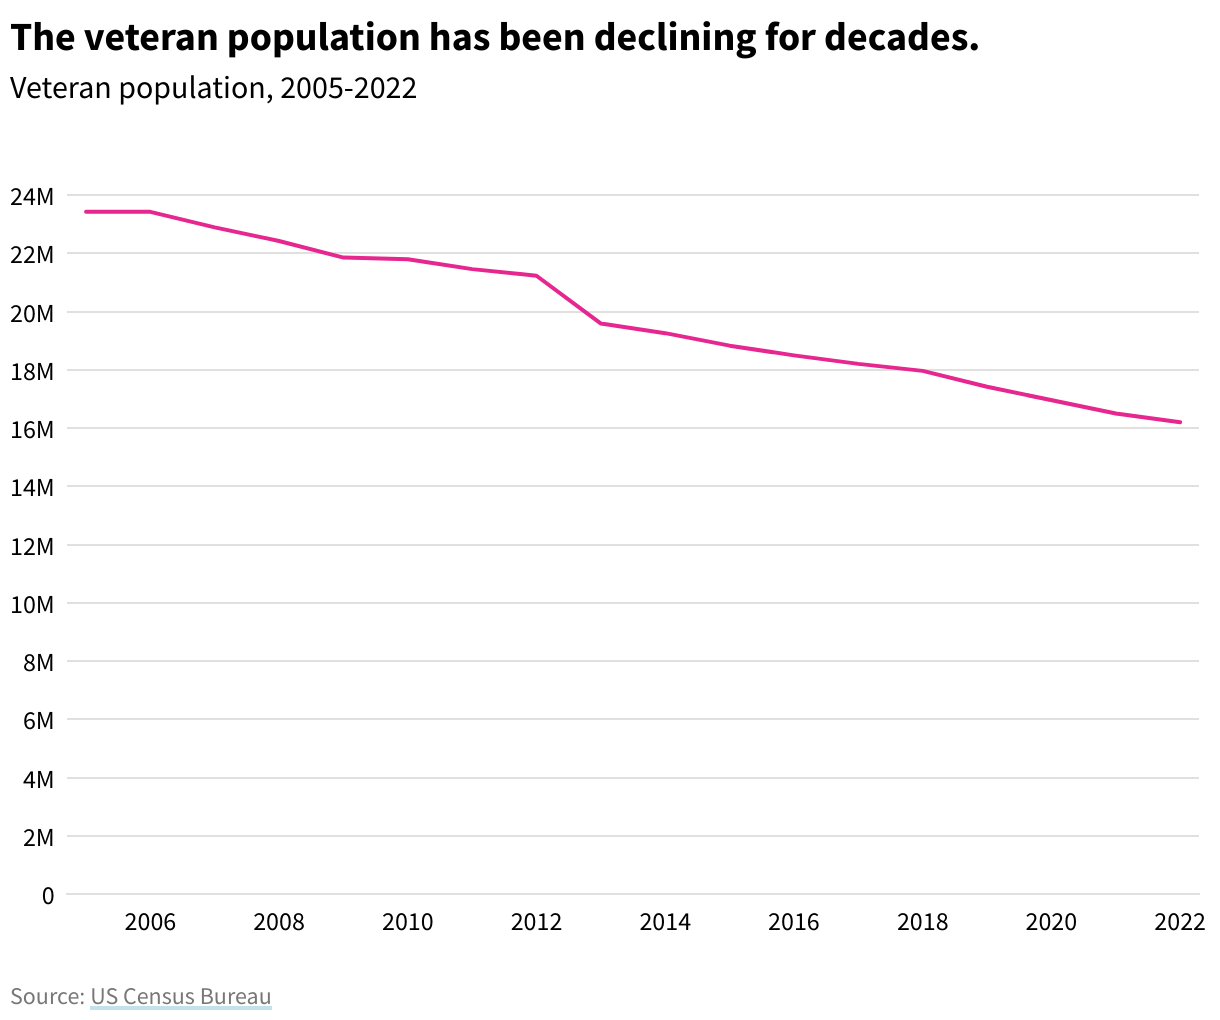 Line chart showing veteran population decline from 23.4M in 2005 to 16.2M in 2022